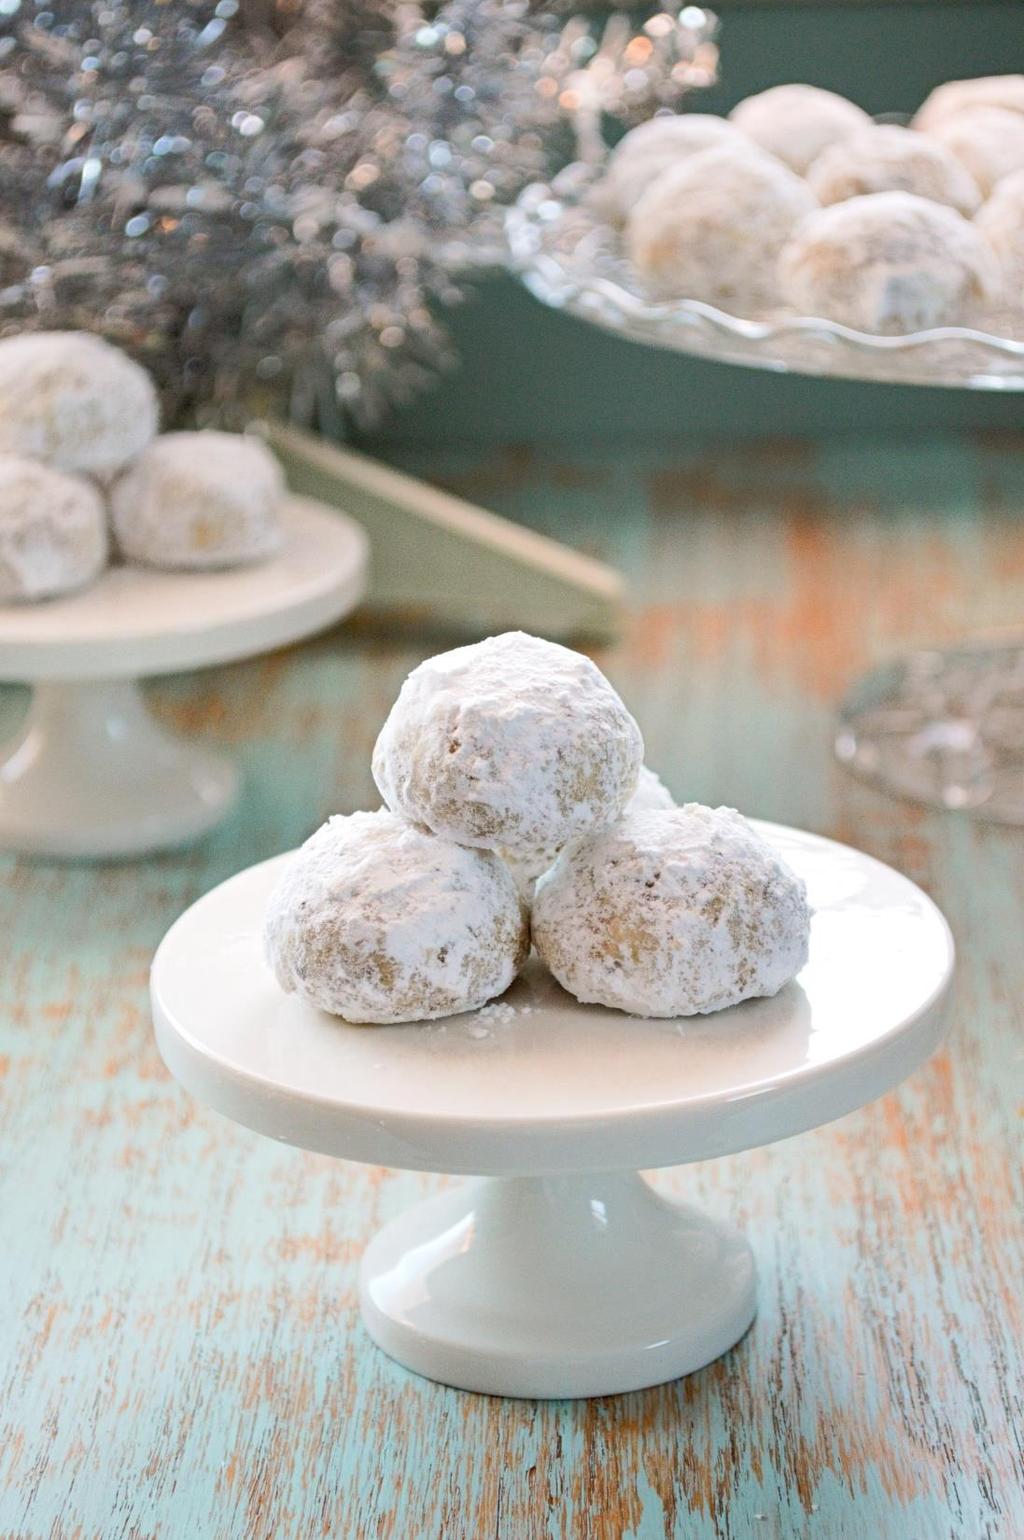 1 cup all-purpose flour 1/8 teaspoon salt 8 tablespoons unsalted butter, room temperature 1/4 cup powdered (confectioners) sugar Extra powdered sugar for rolling 1 teaspoon vanilla 1 cup walnuts or